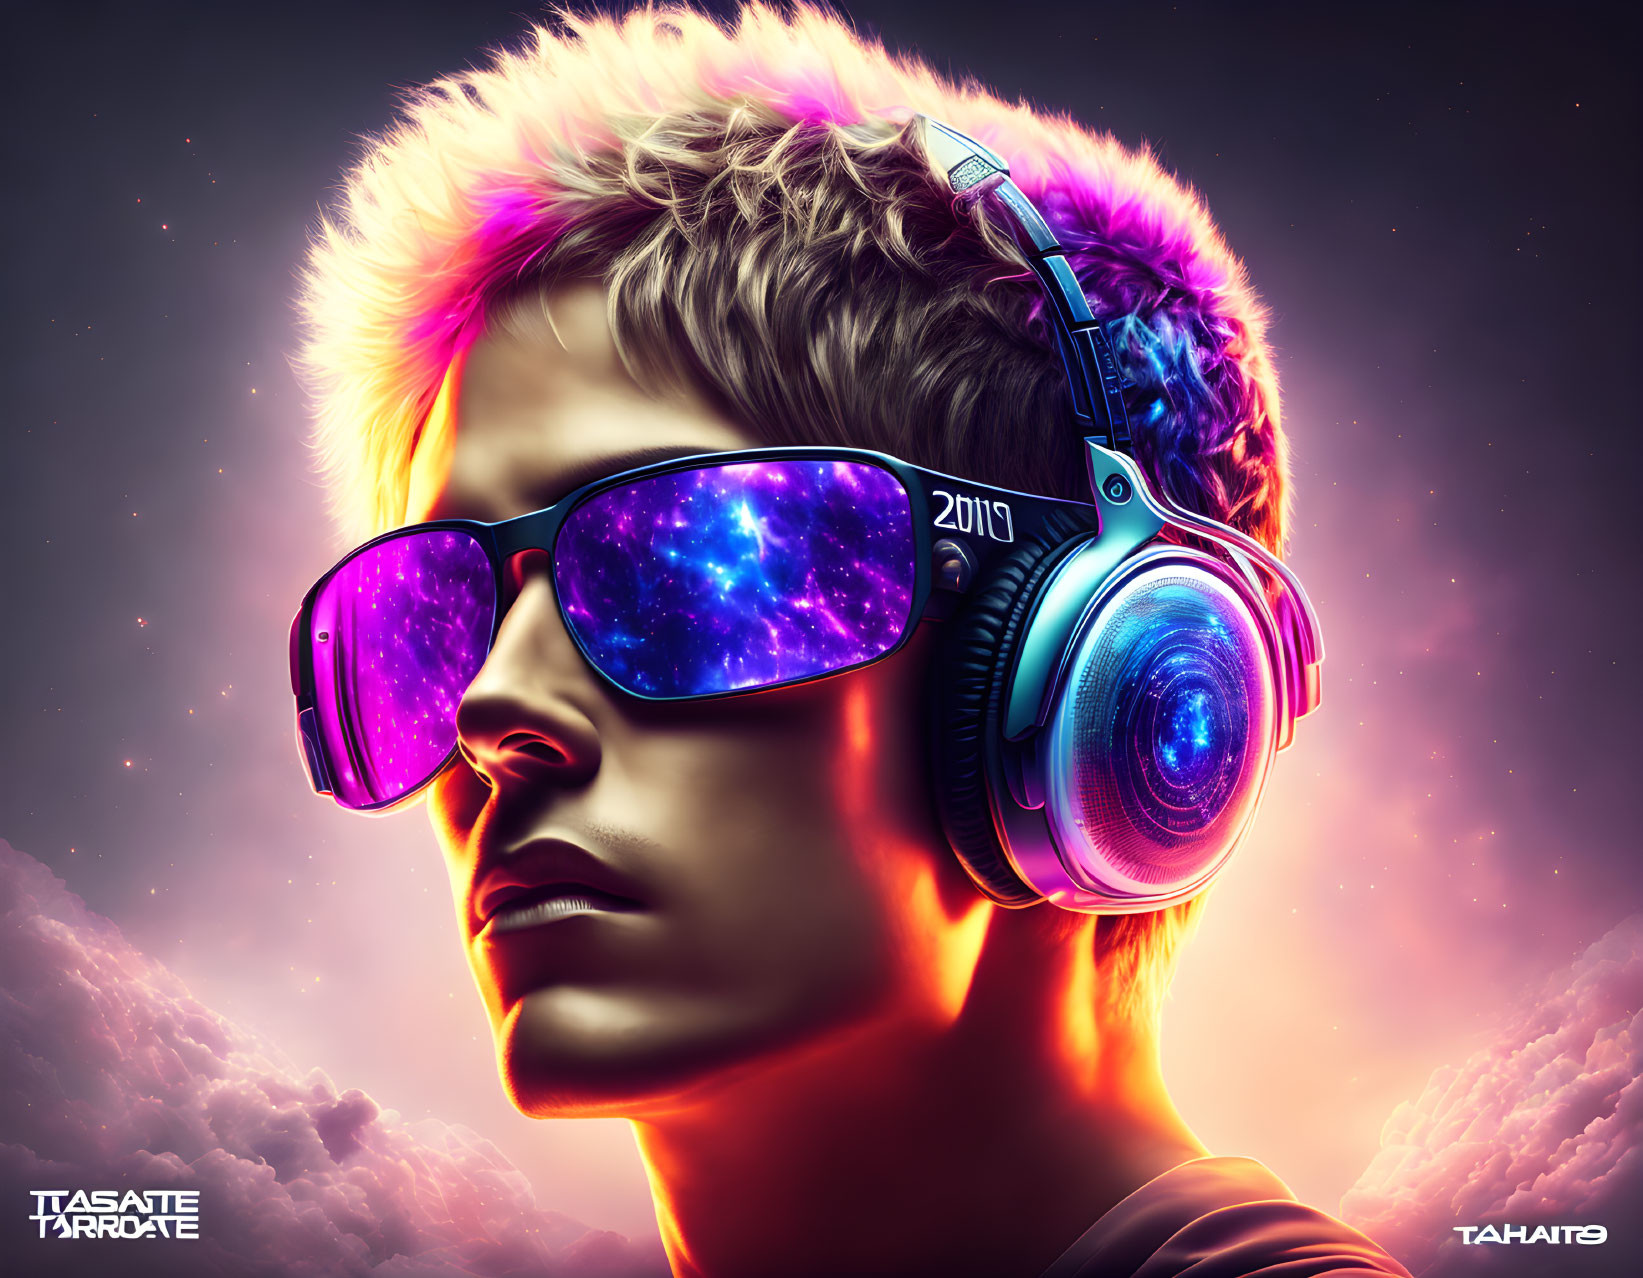 Colorful digital artwork of person with neon headphones and galaxy reflection.